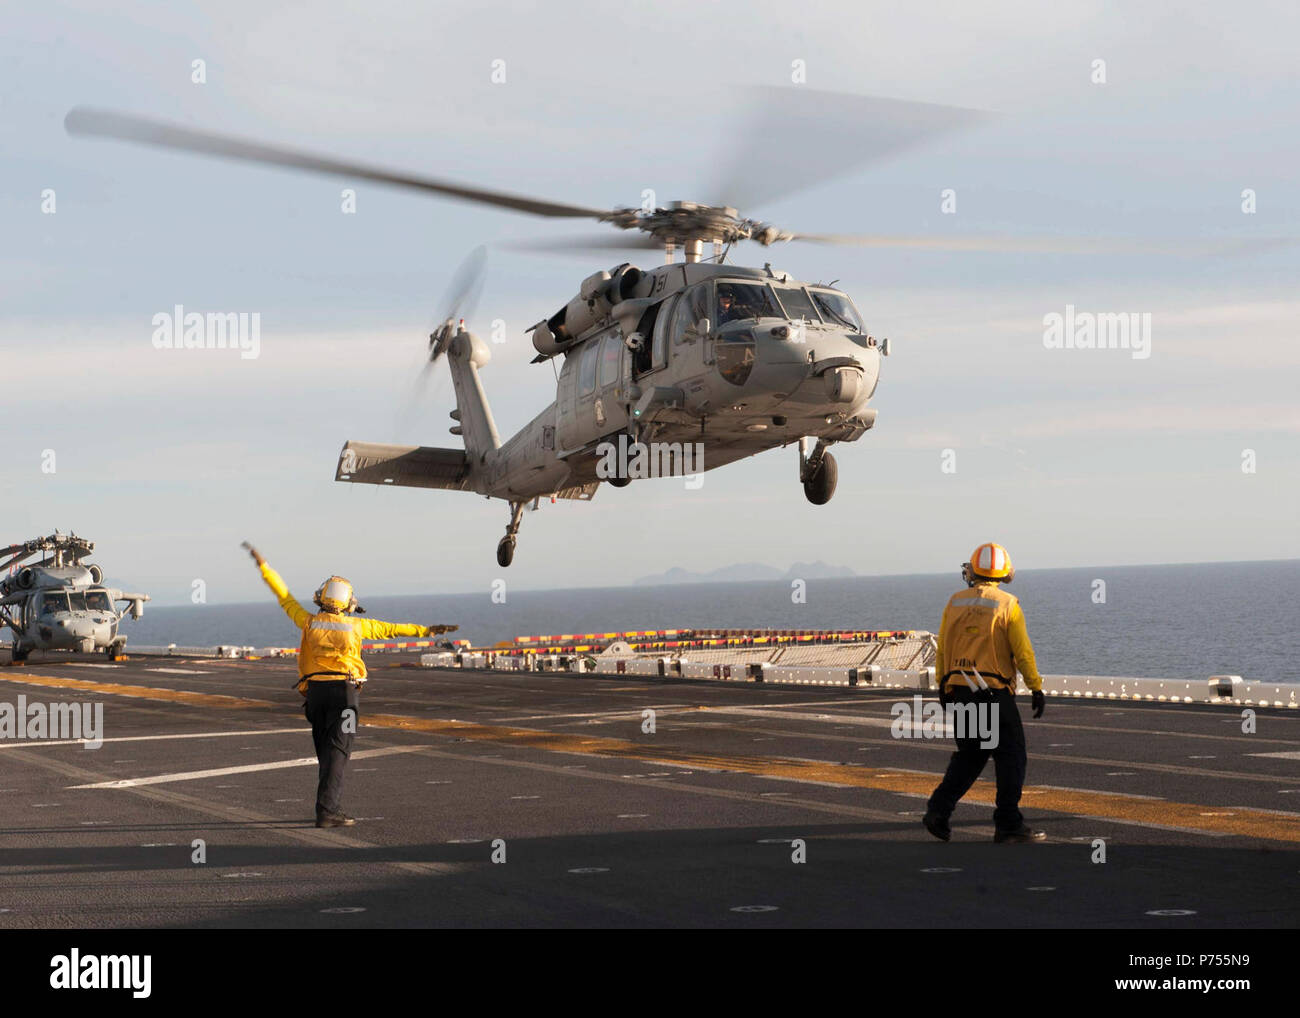 OCEAN (Dec. 3, 2015) An aviation boatswain’s mate (handling) signals to the pilot of an MH-60S Sea Hawk helicopter assigned to the “Wild Cards” of Helicopter Sea Combat Squadron (HSC) 23 on the flight deck of the amphibious assault ship USS Boxer (LHD 4). The Boxer Amphibious Ready Group (ARG) is underway off the coast of Southern California completing a certification exercise (CERTEX). CERTEX is the final evaluation of the 13th Marine Expeditionary Unit (13th MEU) and Boxer ARG prior to deployment and is intended to certify their readiness to conduct integrated missions across the full spectr Stock Photo